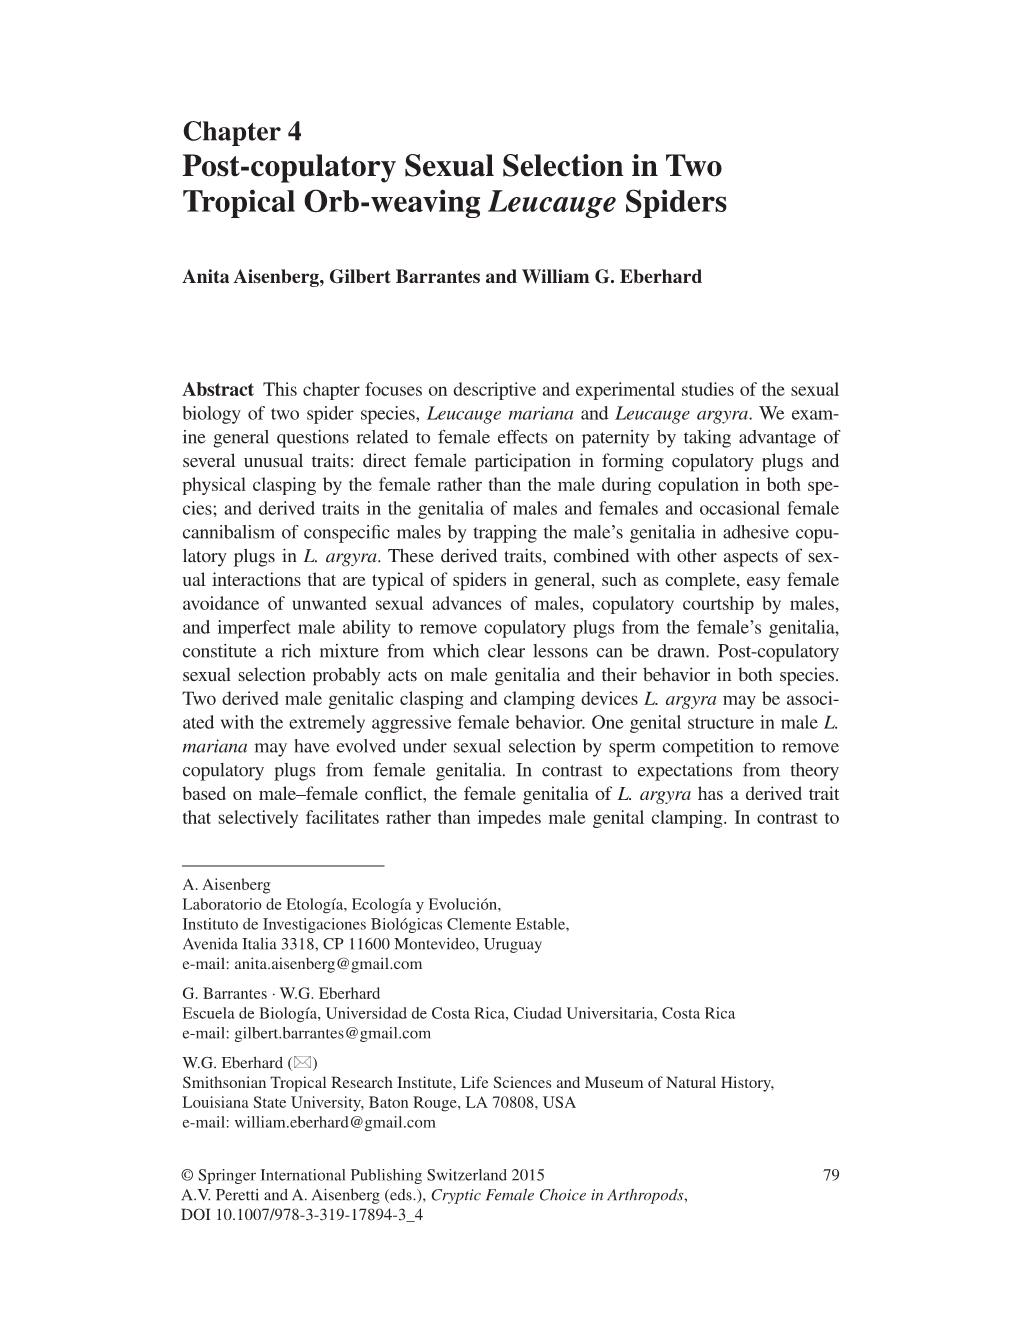 Post-Copulatory Sexual Selection in Two Tropical Orb-Weaving Leucauge Spiders